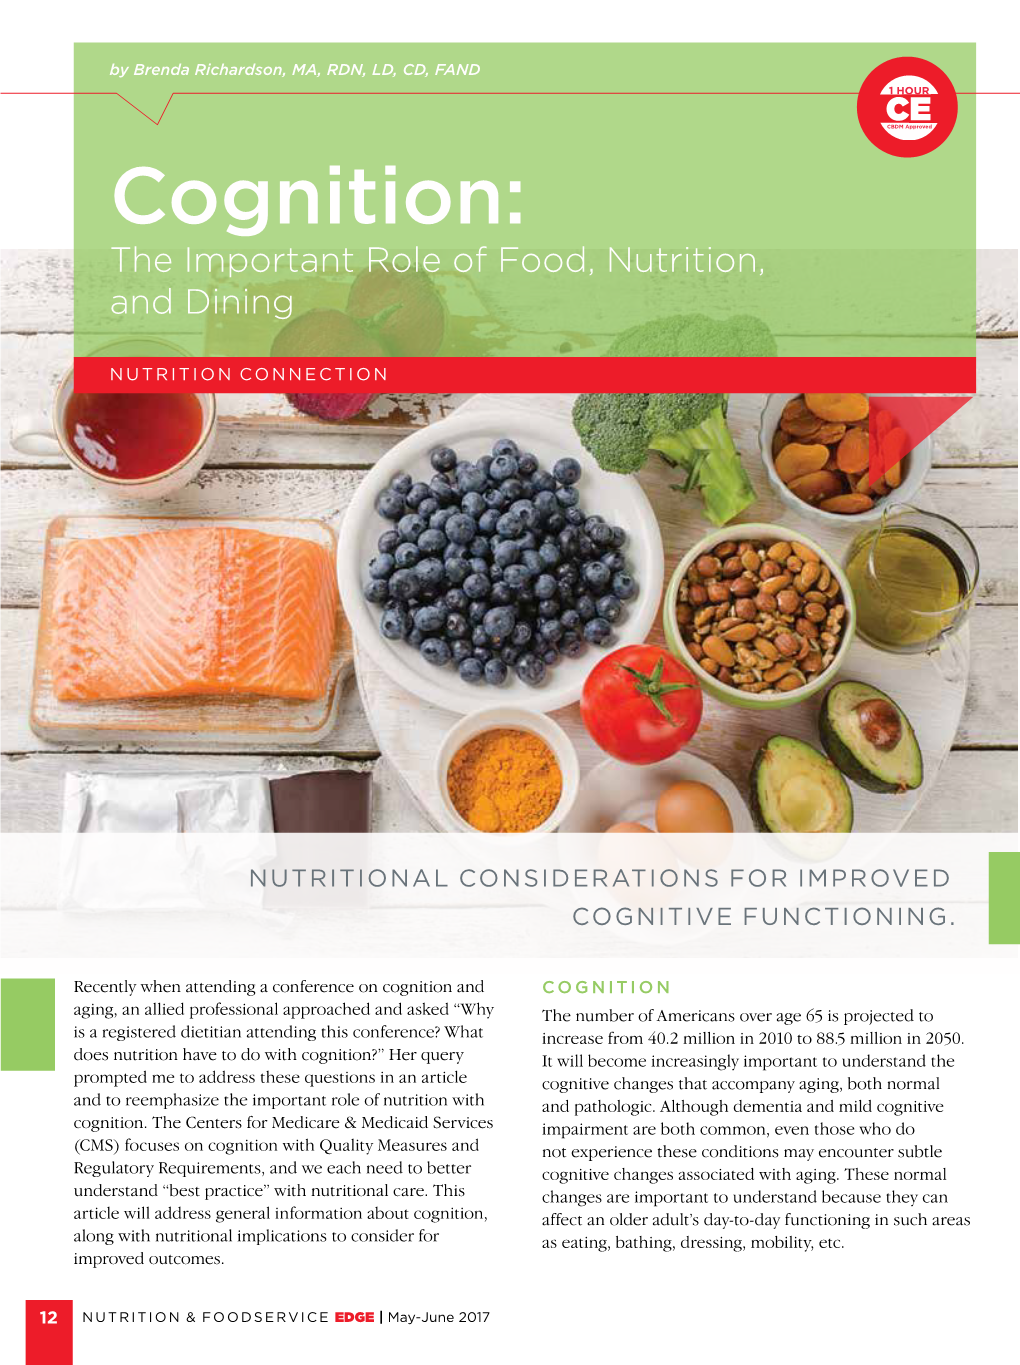 Cognition: the Important Role of Food, Nutrition, and Dining